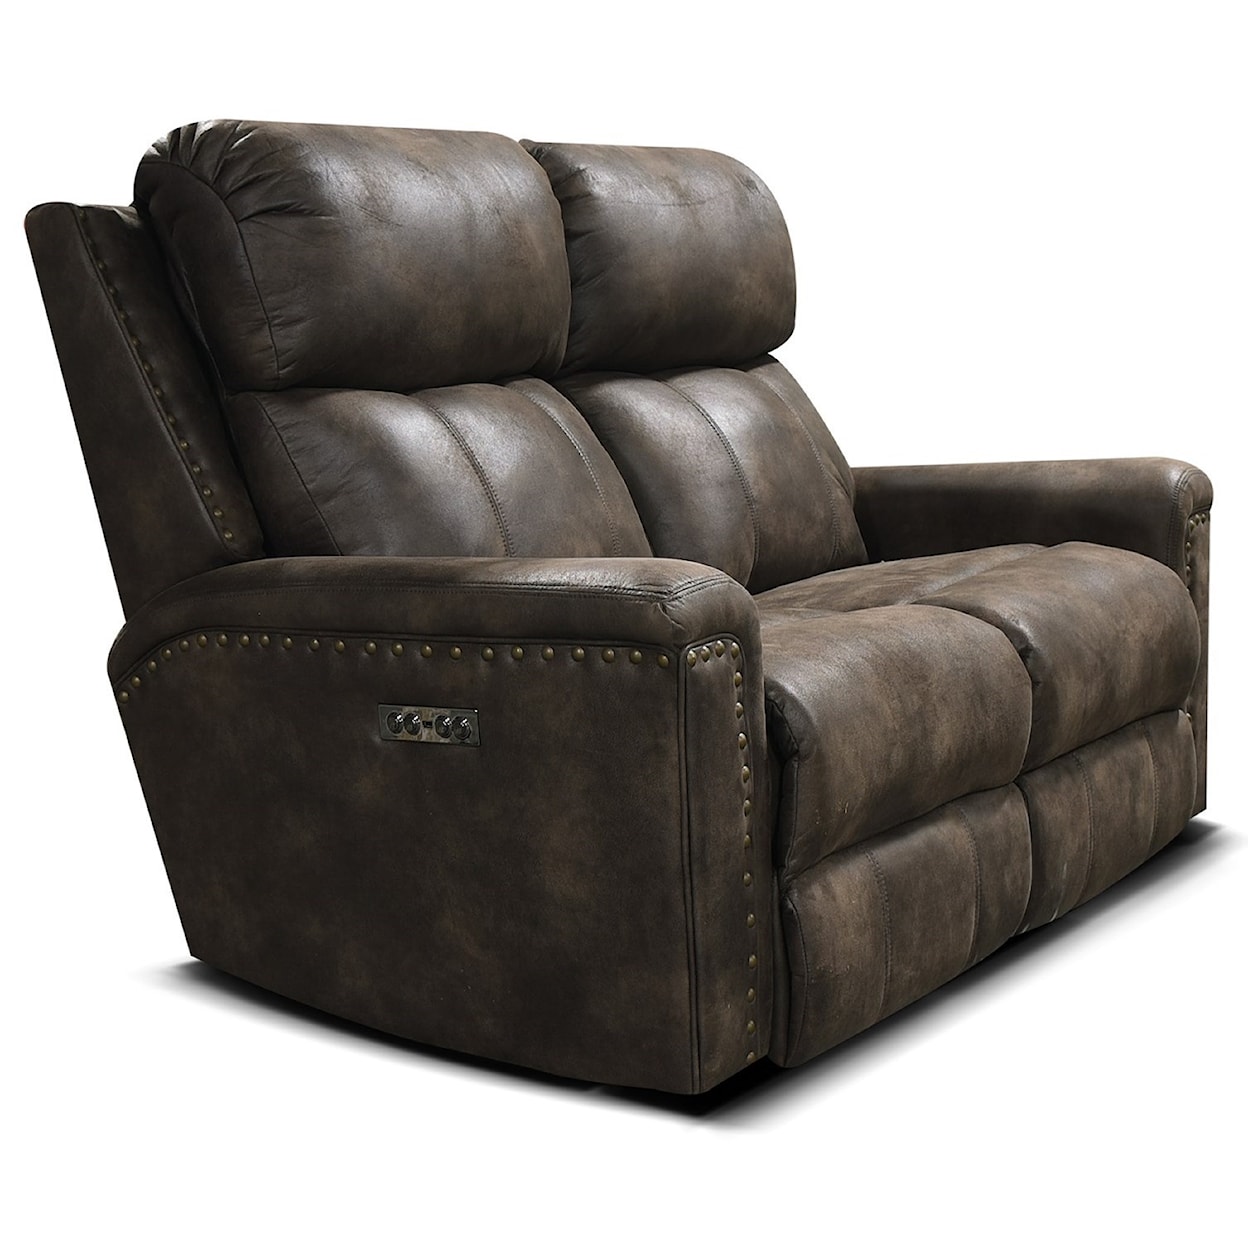 Tennessee Custom Upholstery EZ1C00/H/N Series Double Reclining Loveseat